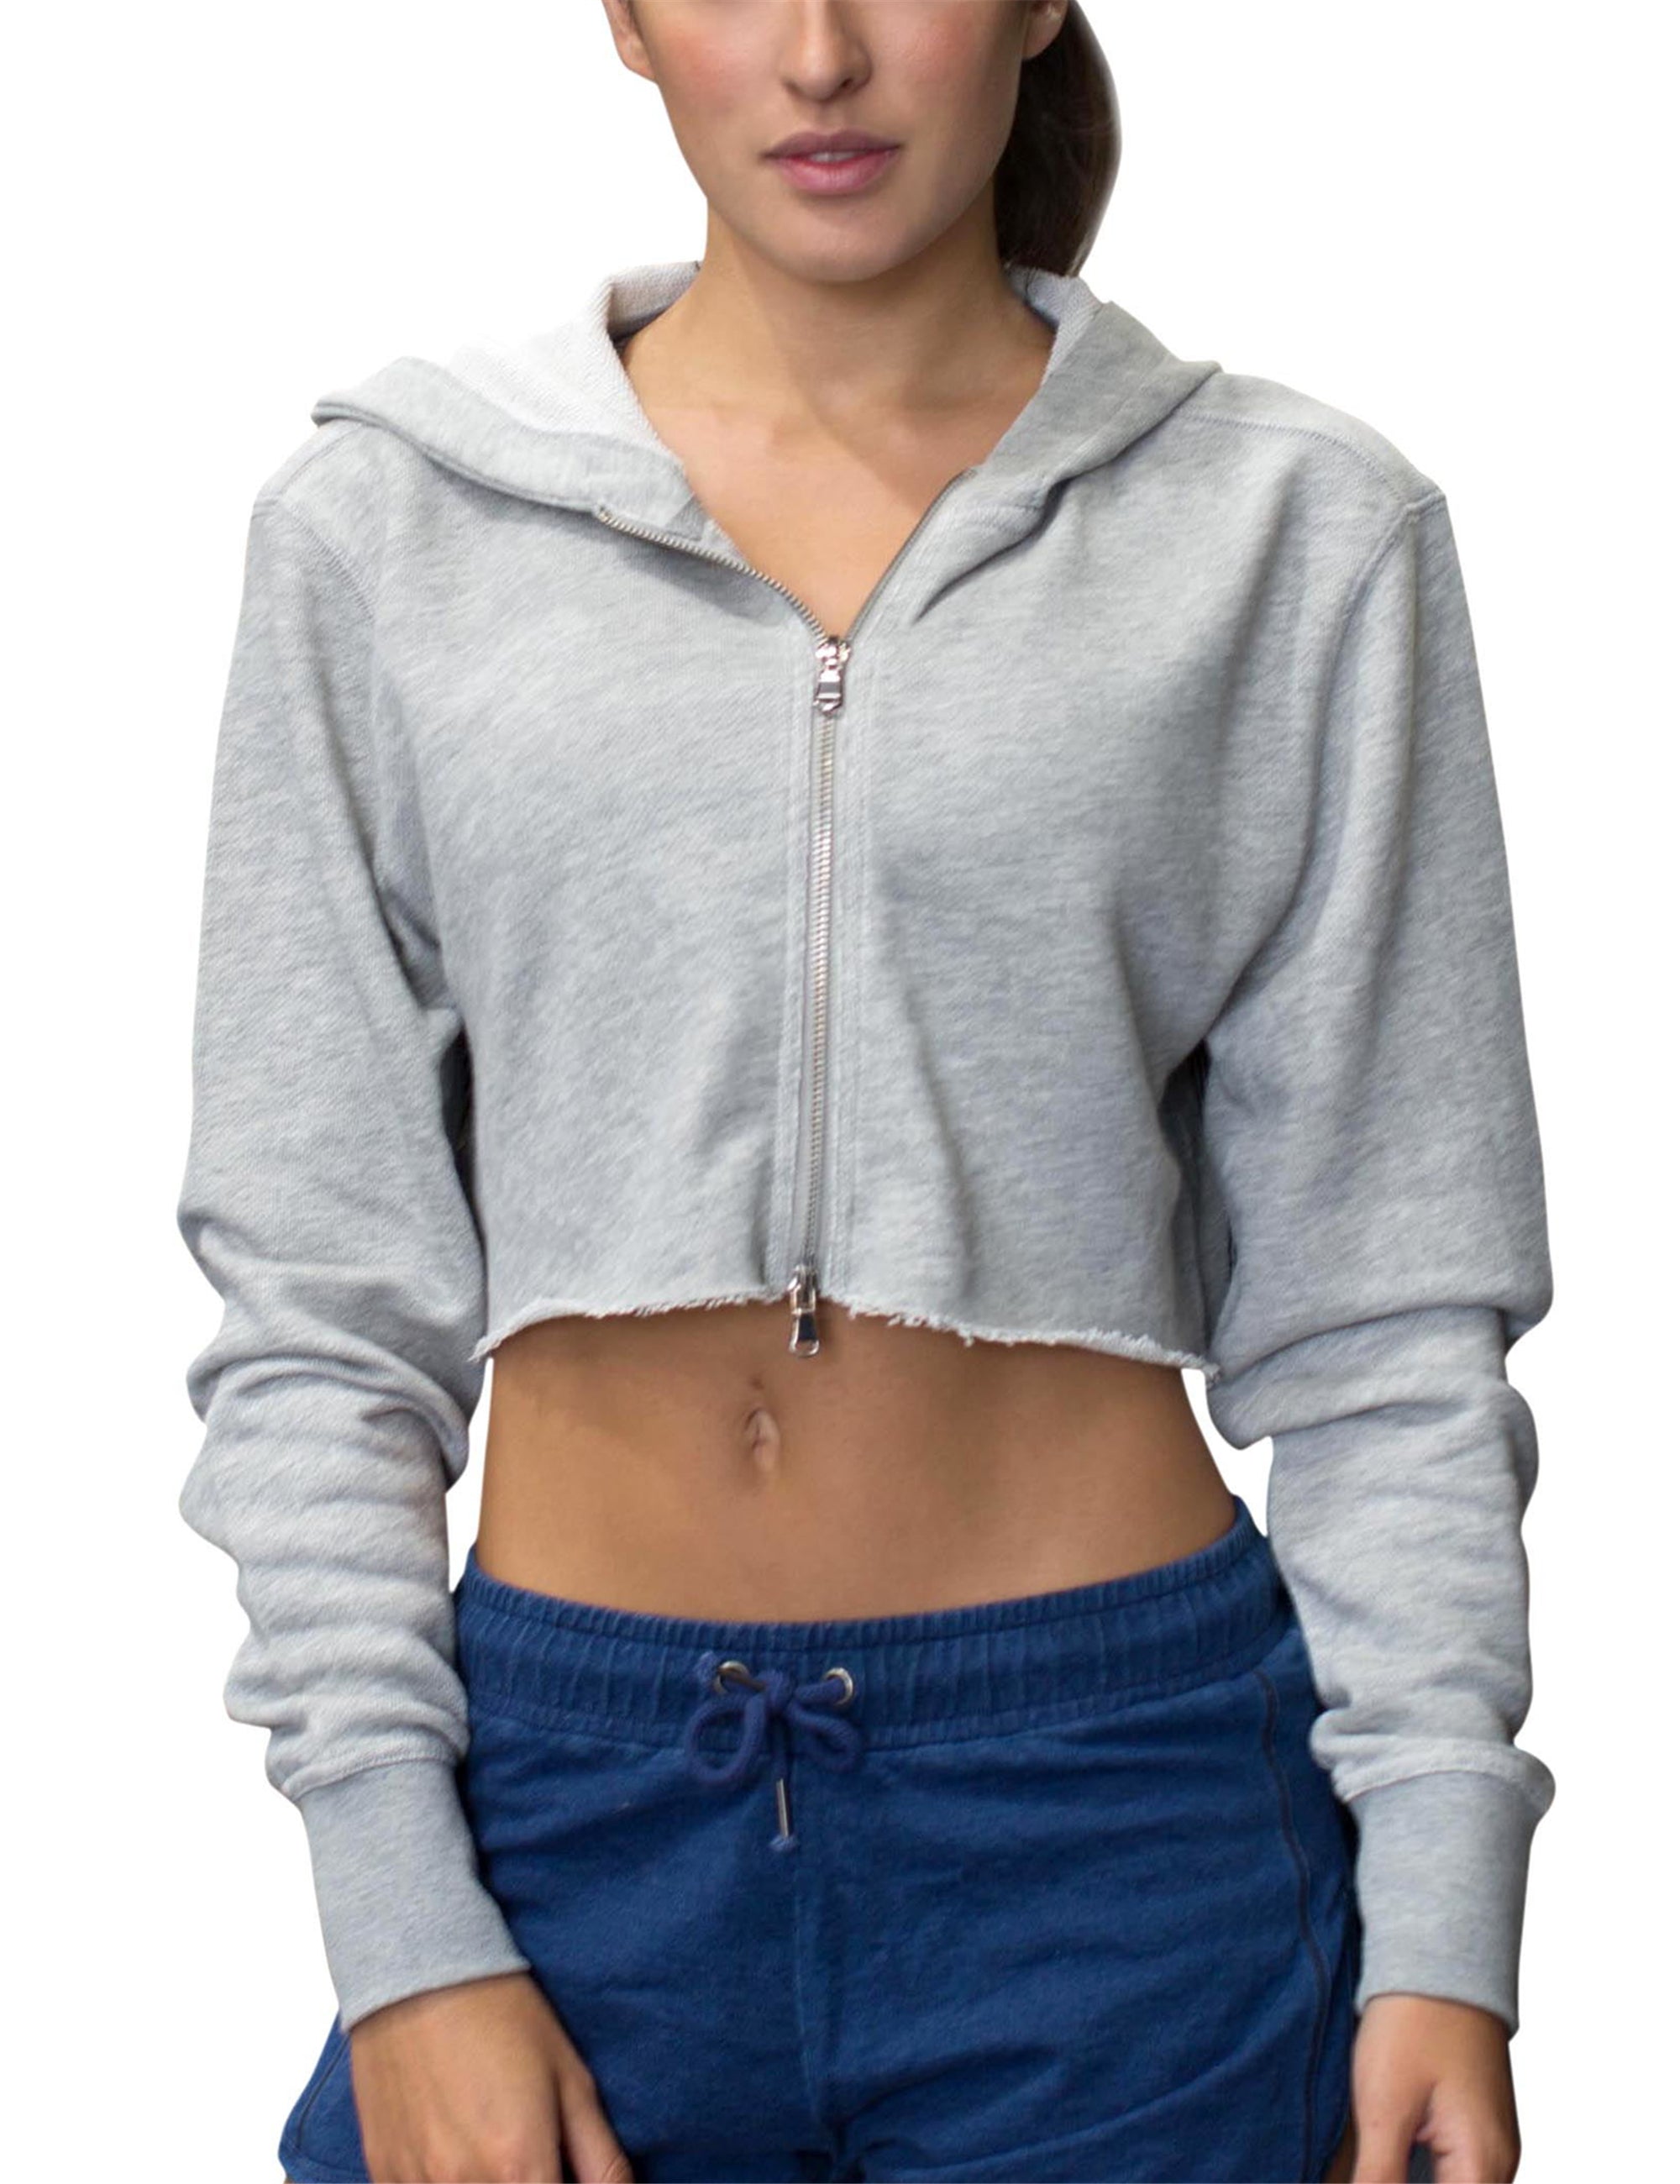 hoodies to workout in